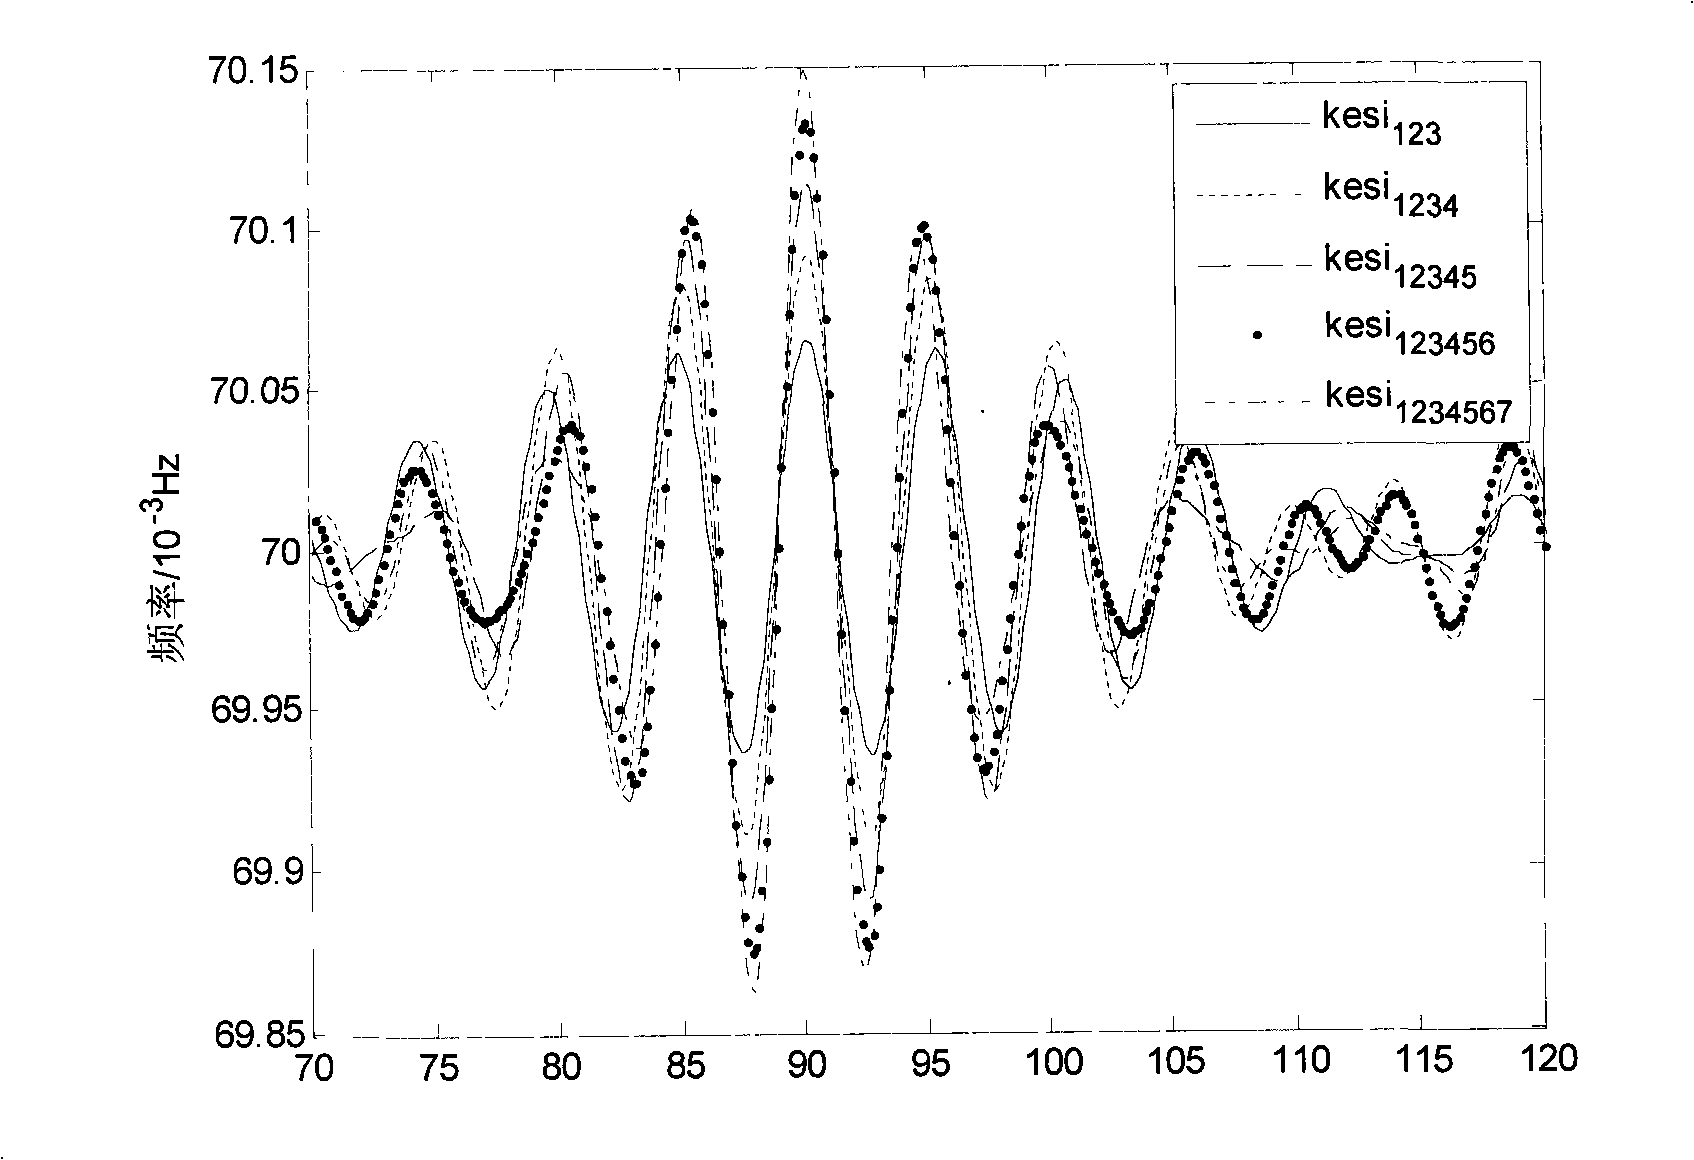 Sea evolution scene emulation method of multiple shortwave nonlinearly modulated by longwave